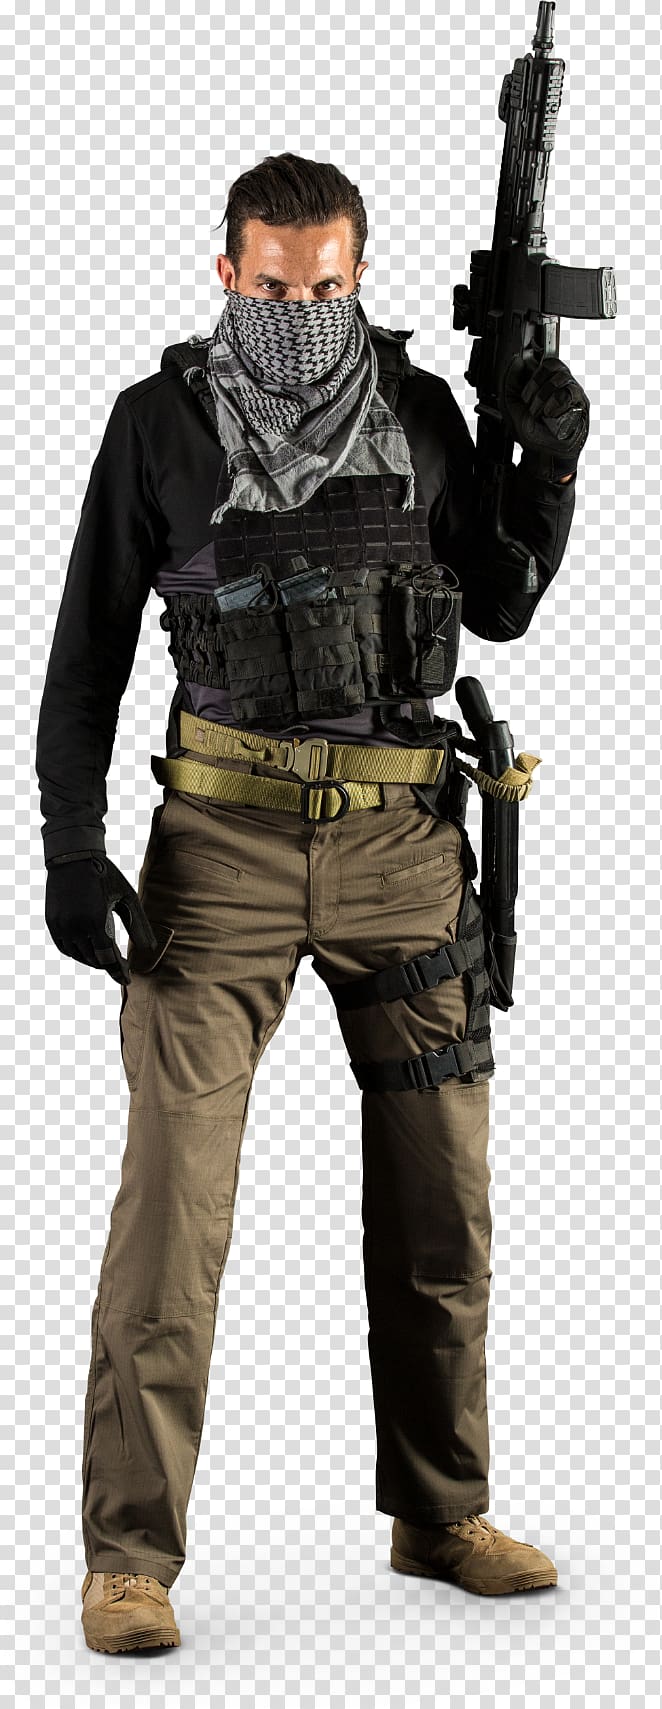 Tom Clancy\'s Ghost Recon Wildlands Tom Clancy\'s Rainbow Six Siege Tom Clancy\'s Ghost Recon: Future Soldier Tom Clancy\'s Rainbow Six: Vegas 2, weaver transparent background PNG clipart